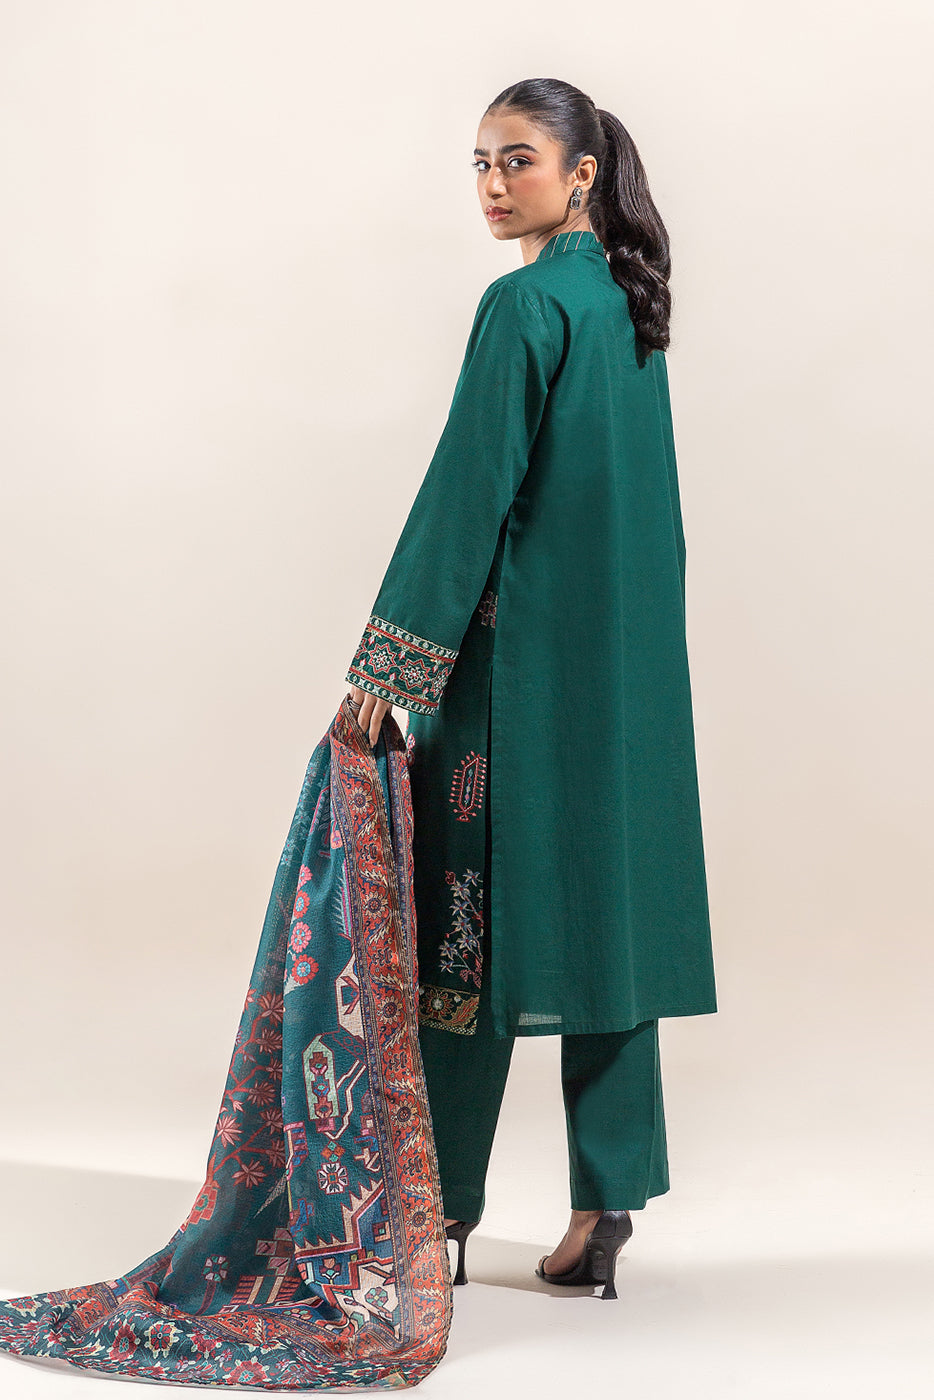 2 PIECE EMBROIDERED LAWN SUIT-PERSIAN GREEN (UNSTITCHED)